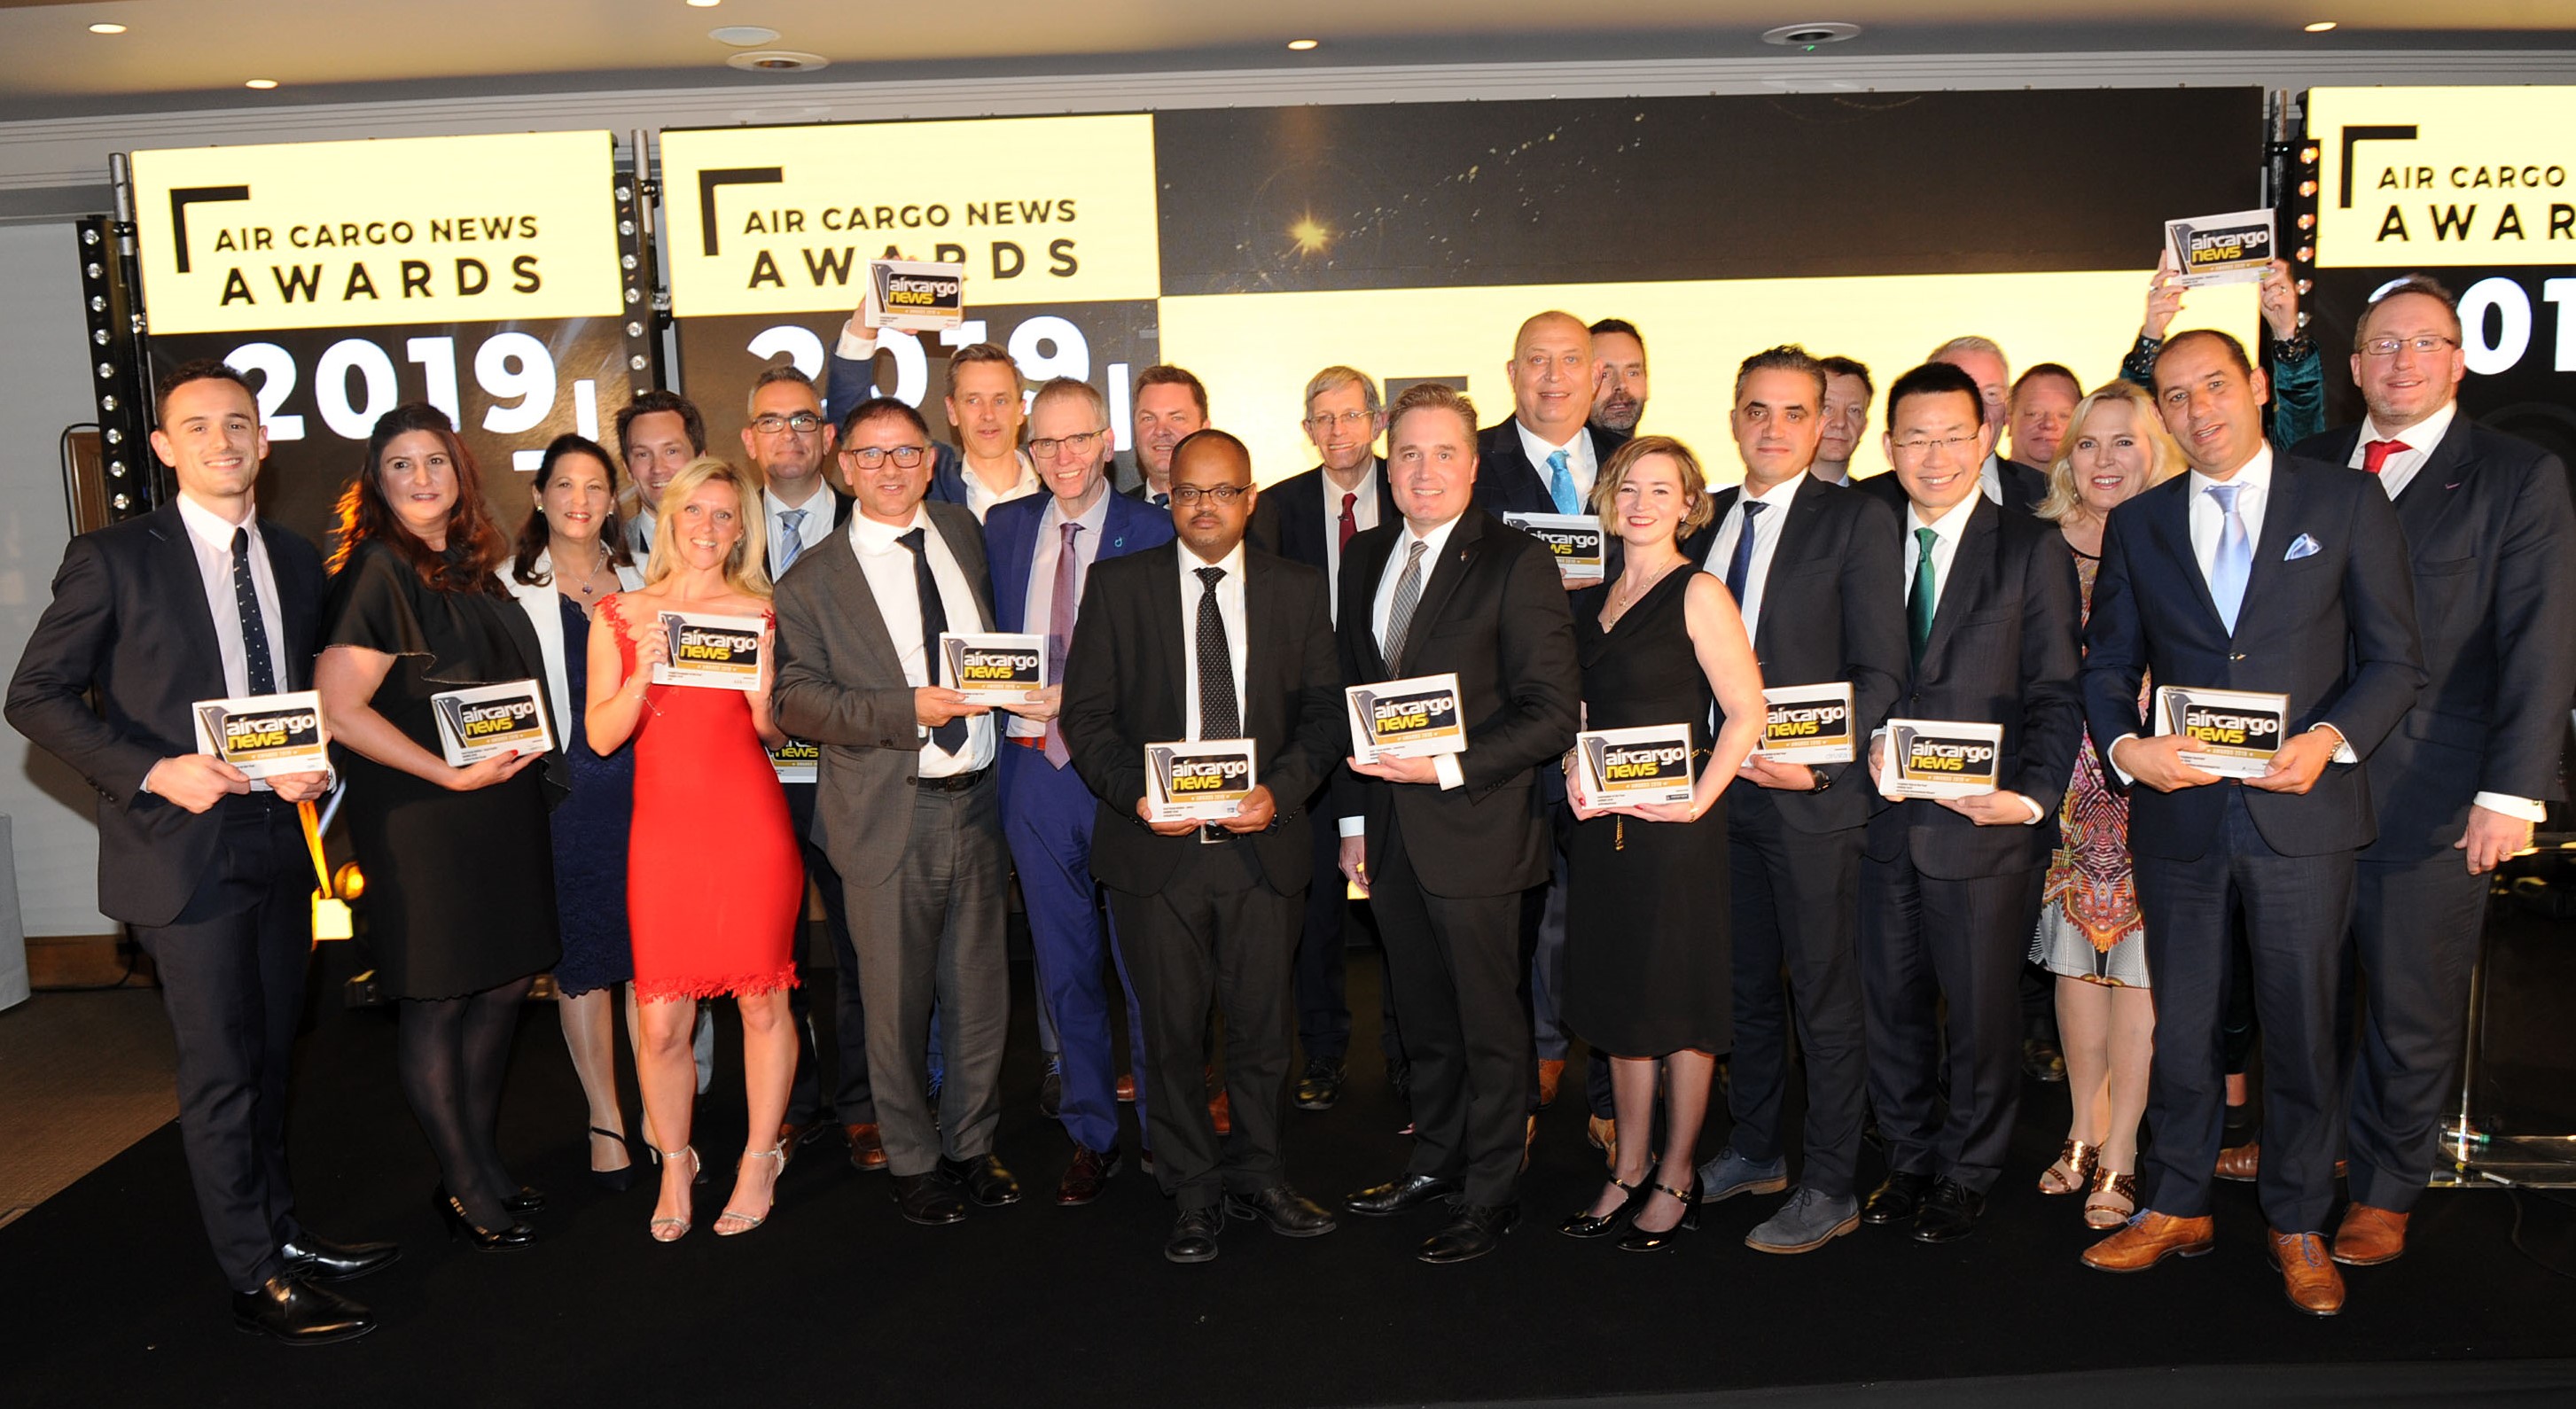 AirCargoAwards2019_030 All the winners